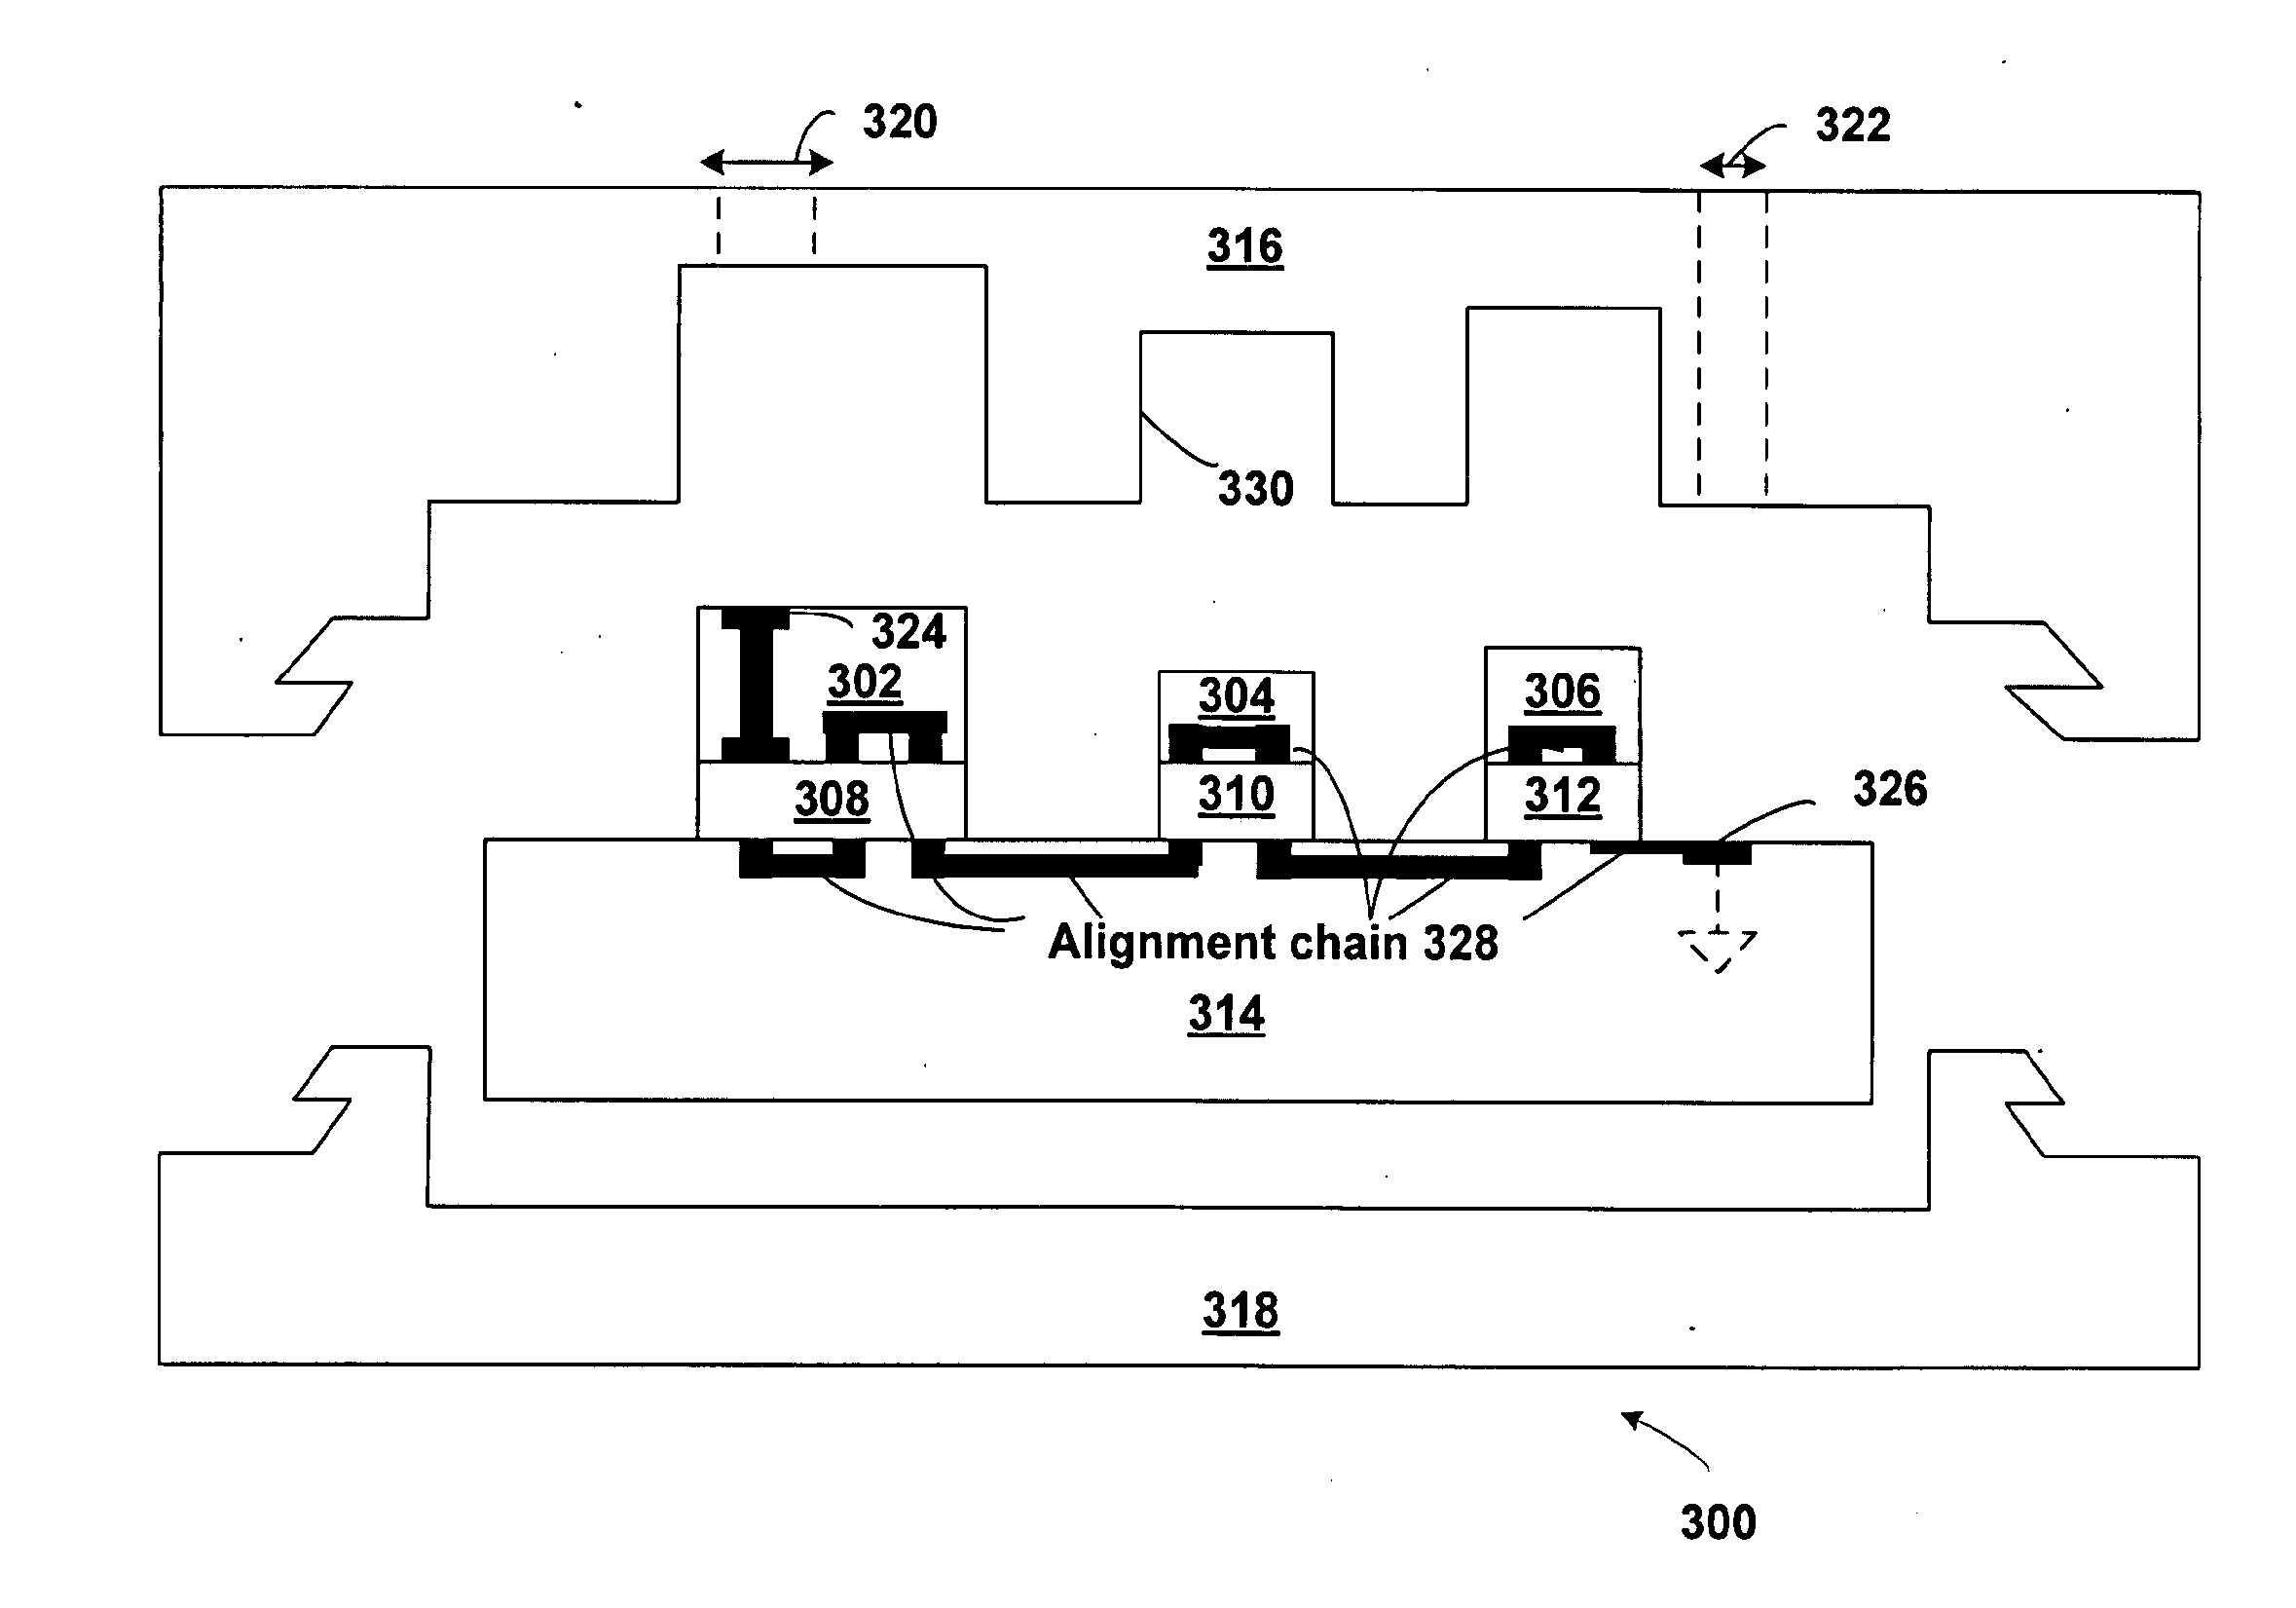 Electronic assembly with detachable components